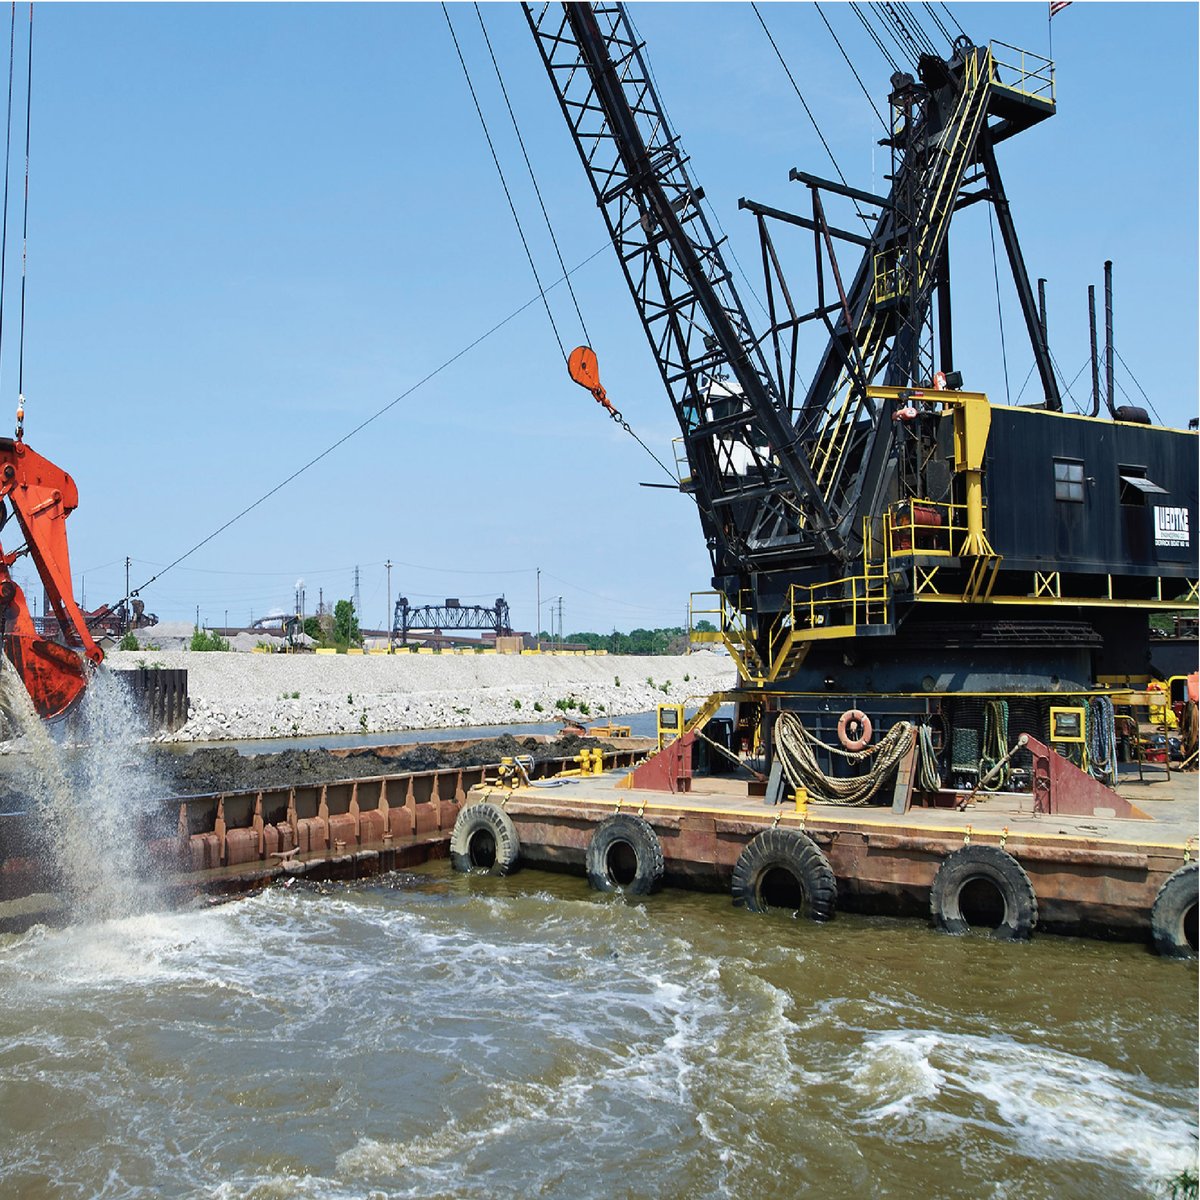 As we celebrate #InfrastructureWeek, what are some ways infrastructure investments benefit our region? Consider the CHEERS project, which will utilize the Port's dredging capabilities to create new greenspace on the lake and improve shoreline stability: bit.ly/4bFlcUo